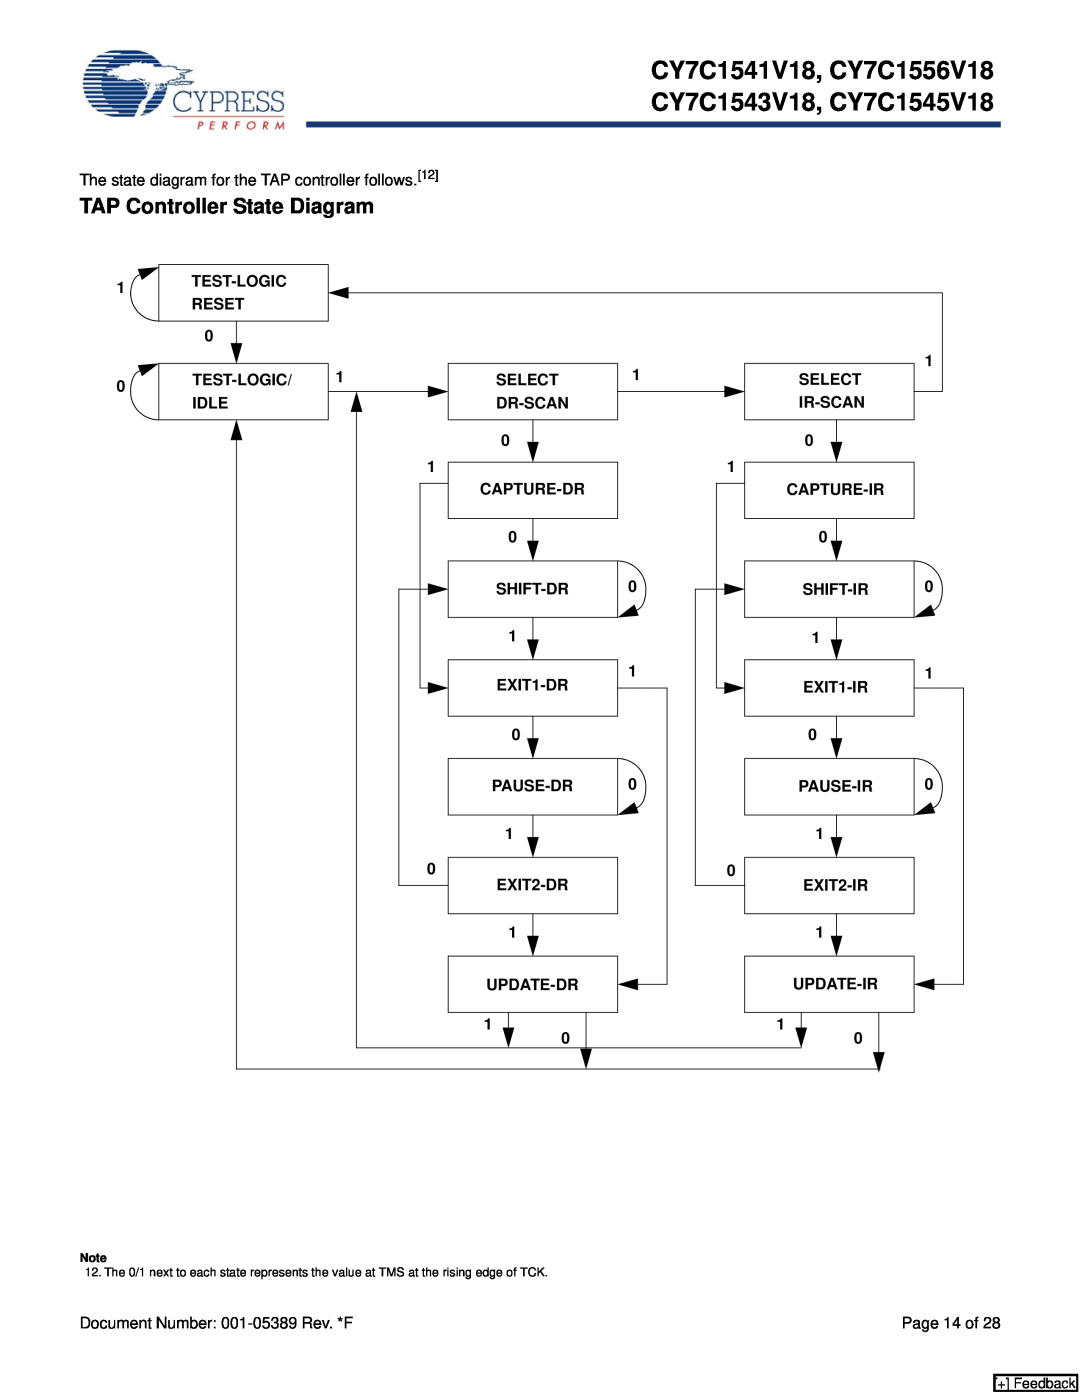 Cypress manual TAP Controller State Diagram, CY7C1541V18, CY7C1556V18 CY7C1543V18, CY7C1545V18, Page 14 of 